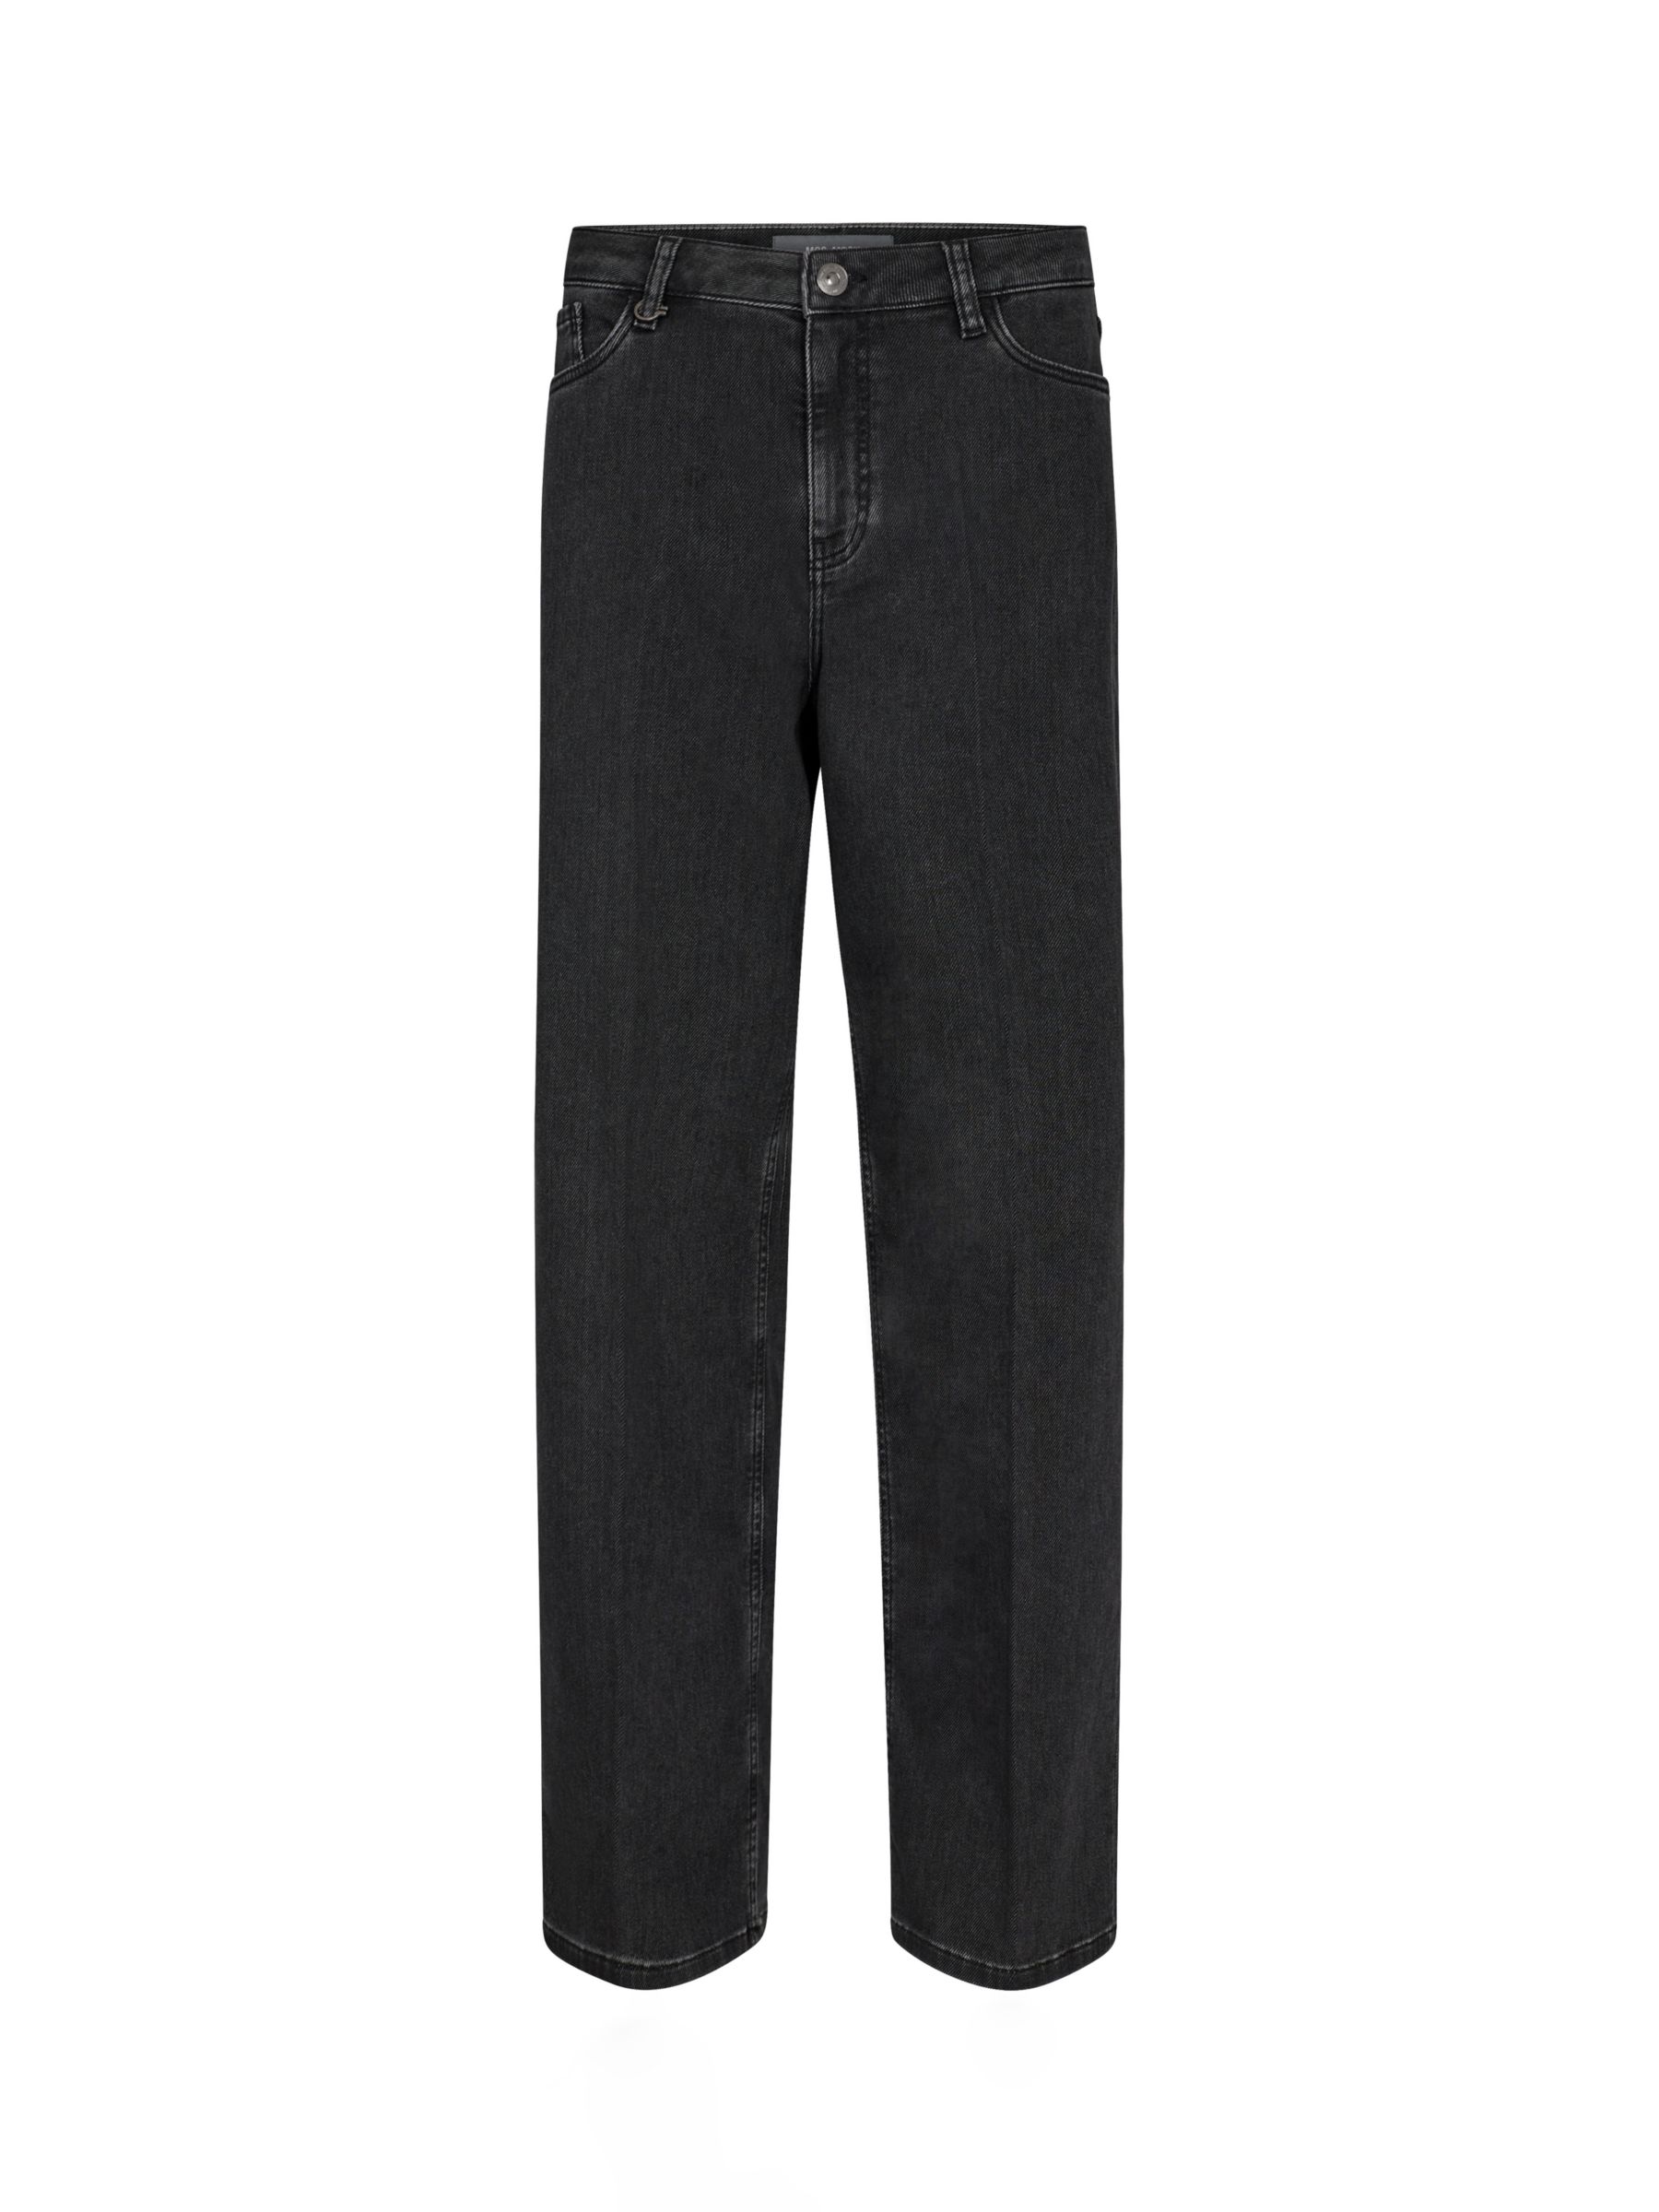 MOS MOSH Relee Young Straight Fit Jeans, Dark Grey at John Lewis & Partners